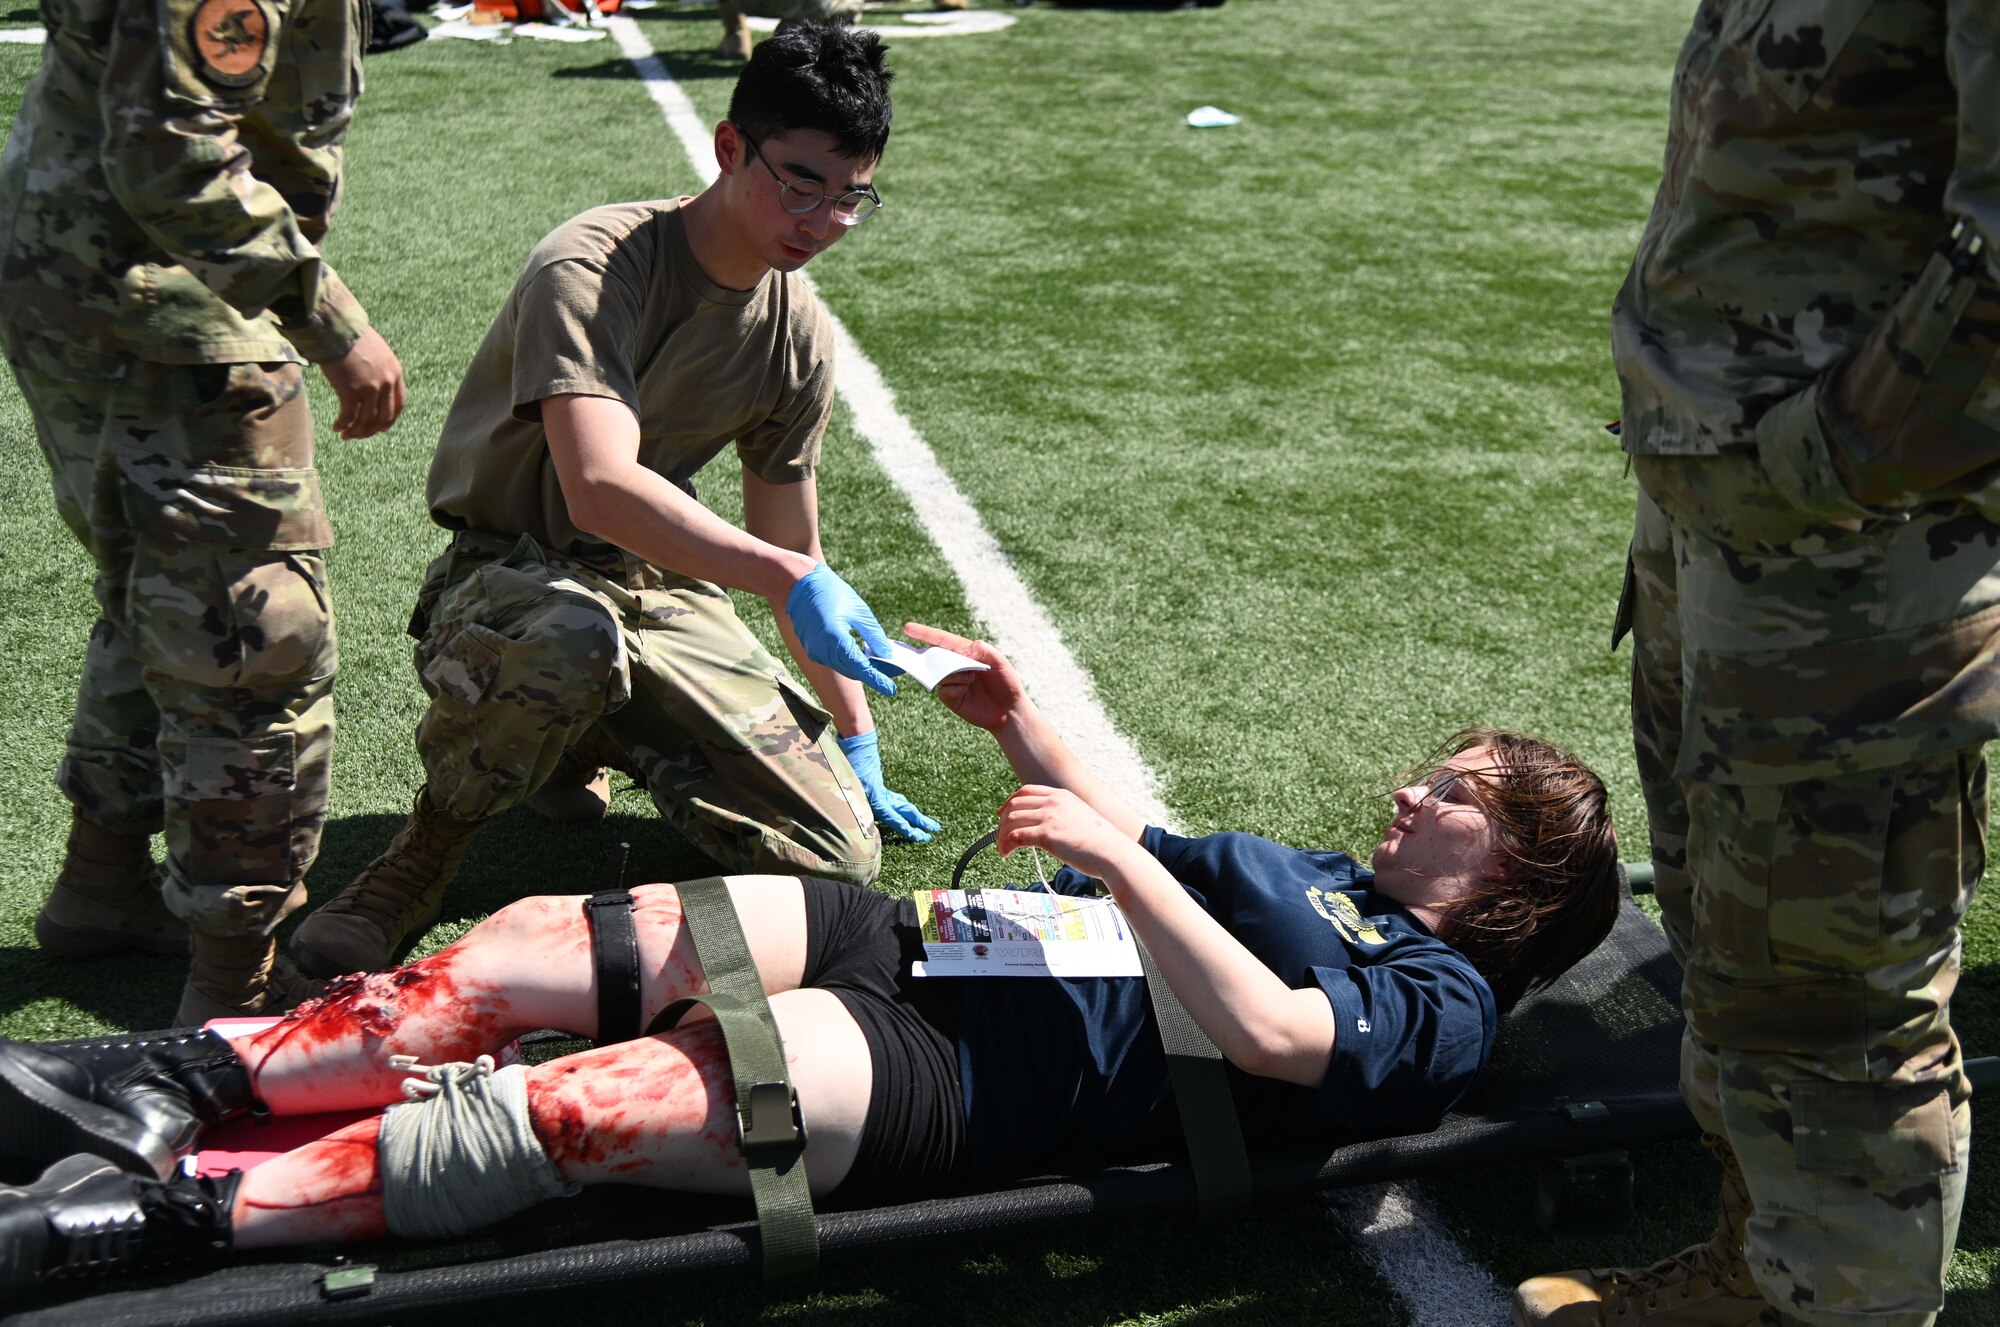 An Airman triages a simulated patient.